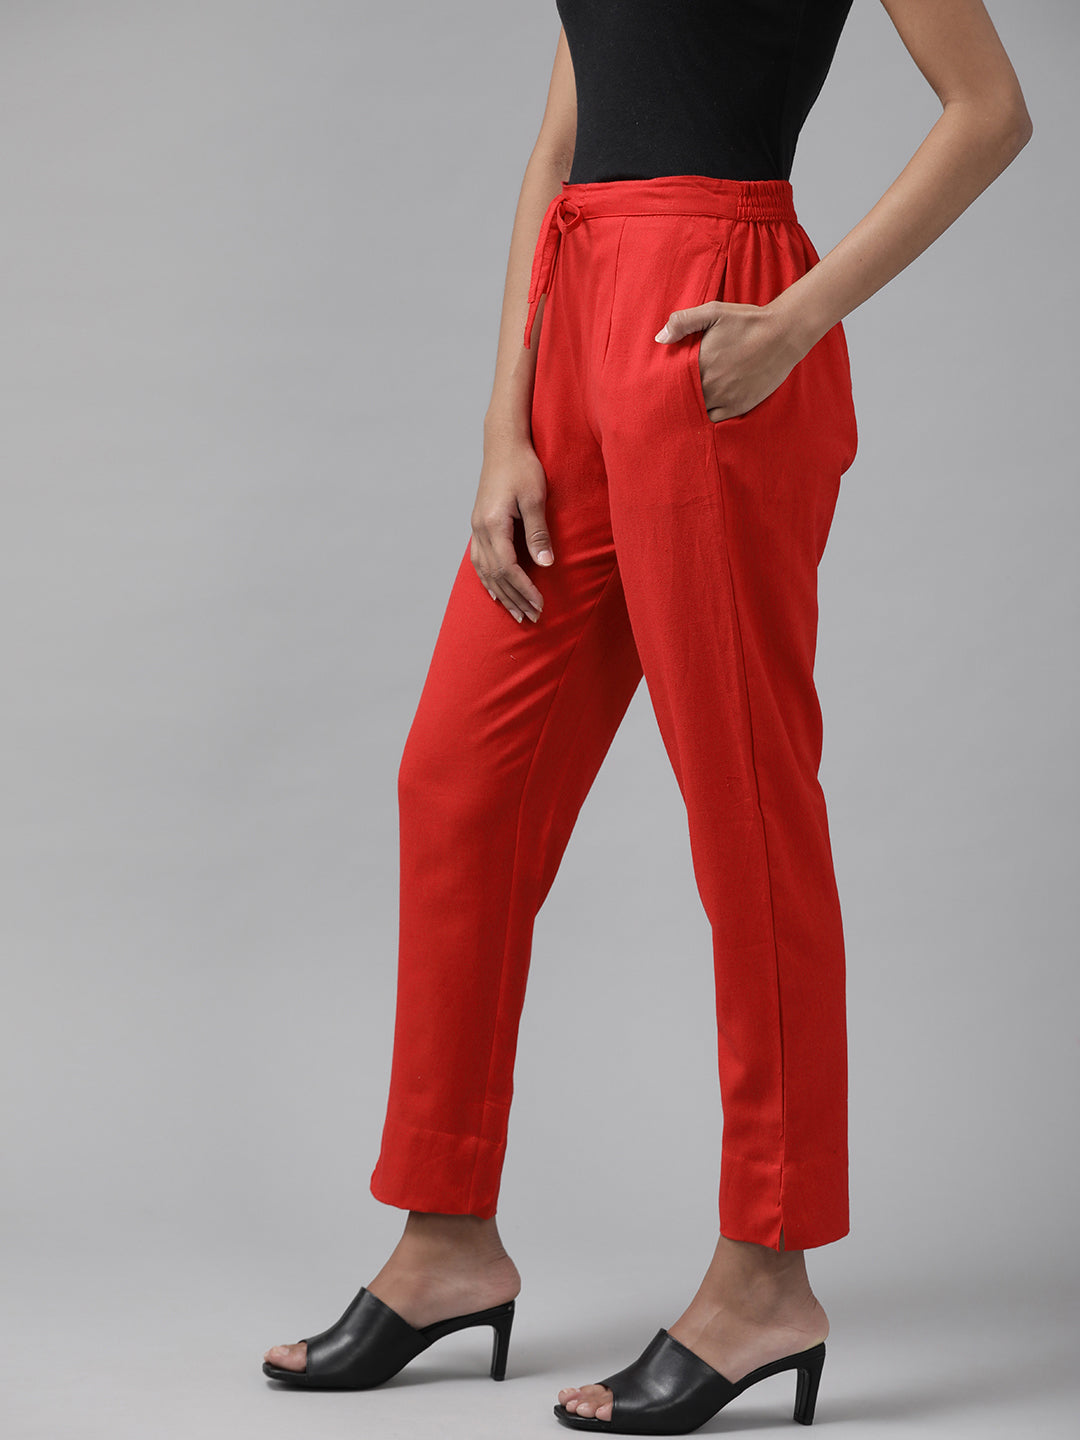 Women's Red Slim Fit Pure Cotton Trousers - Yufta